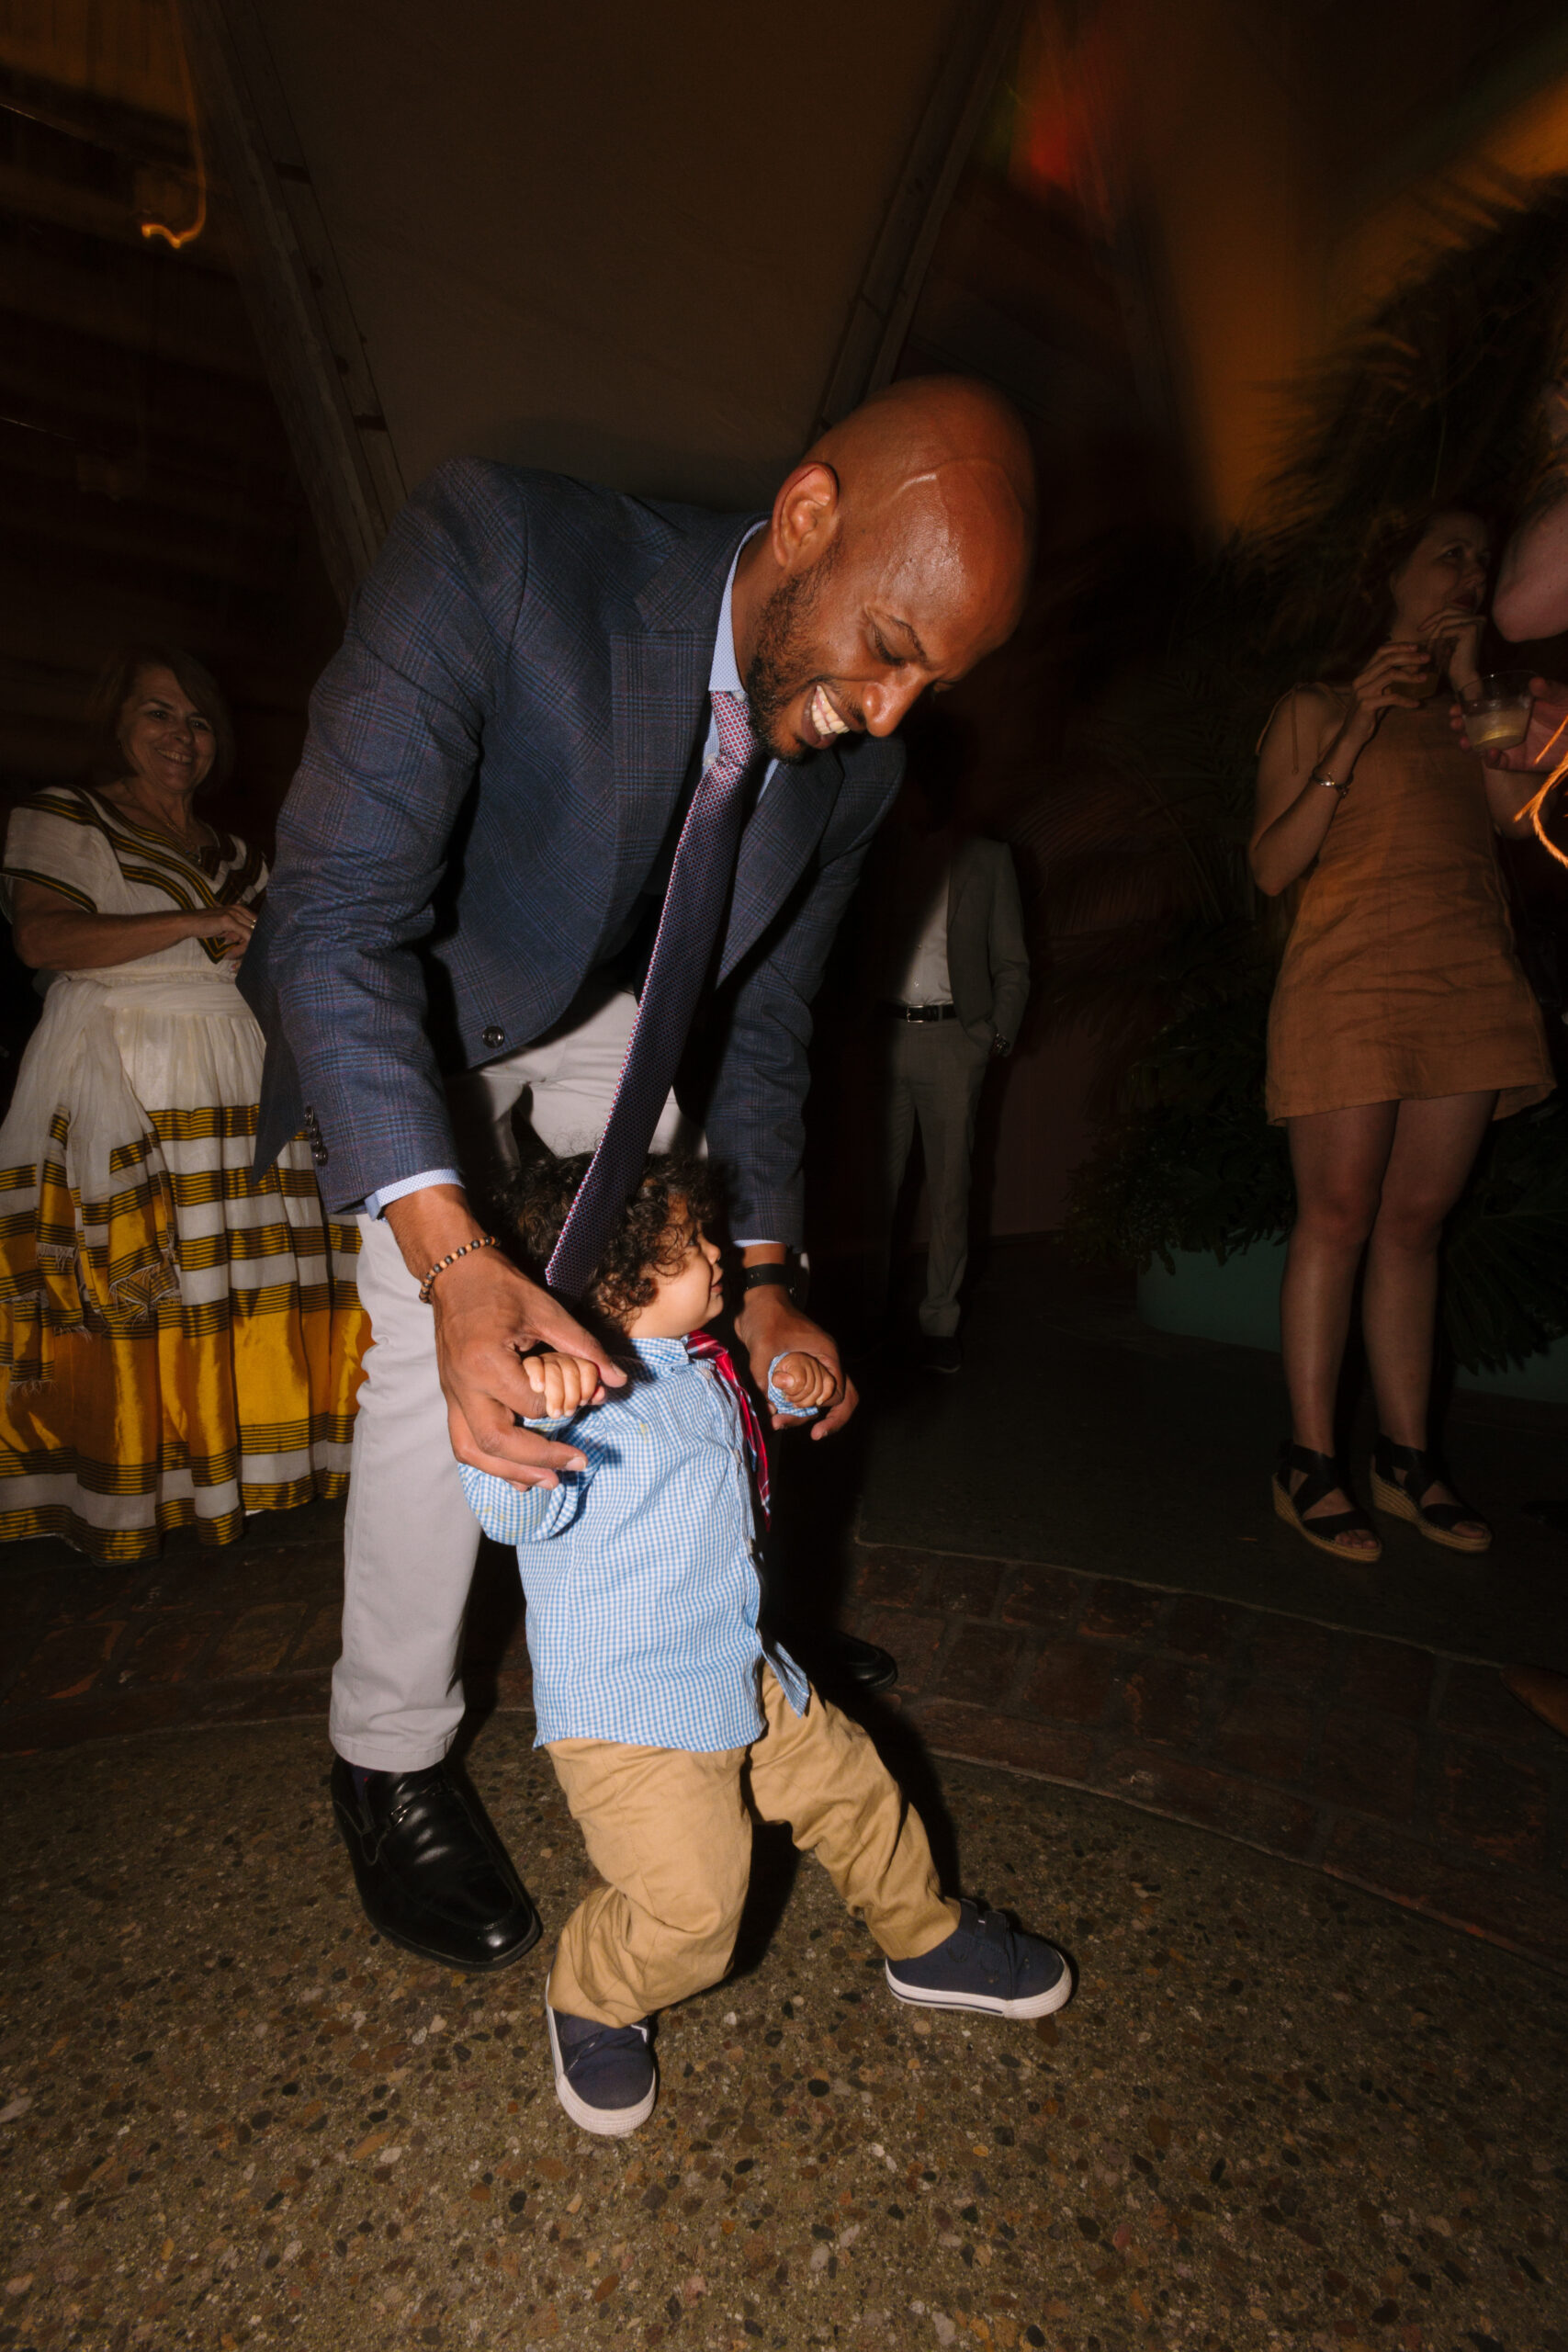 direct flash photo of father dancing with his baby during wedding reception